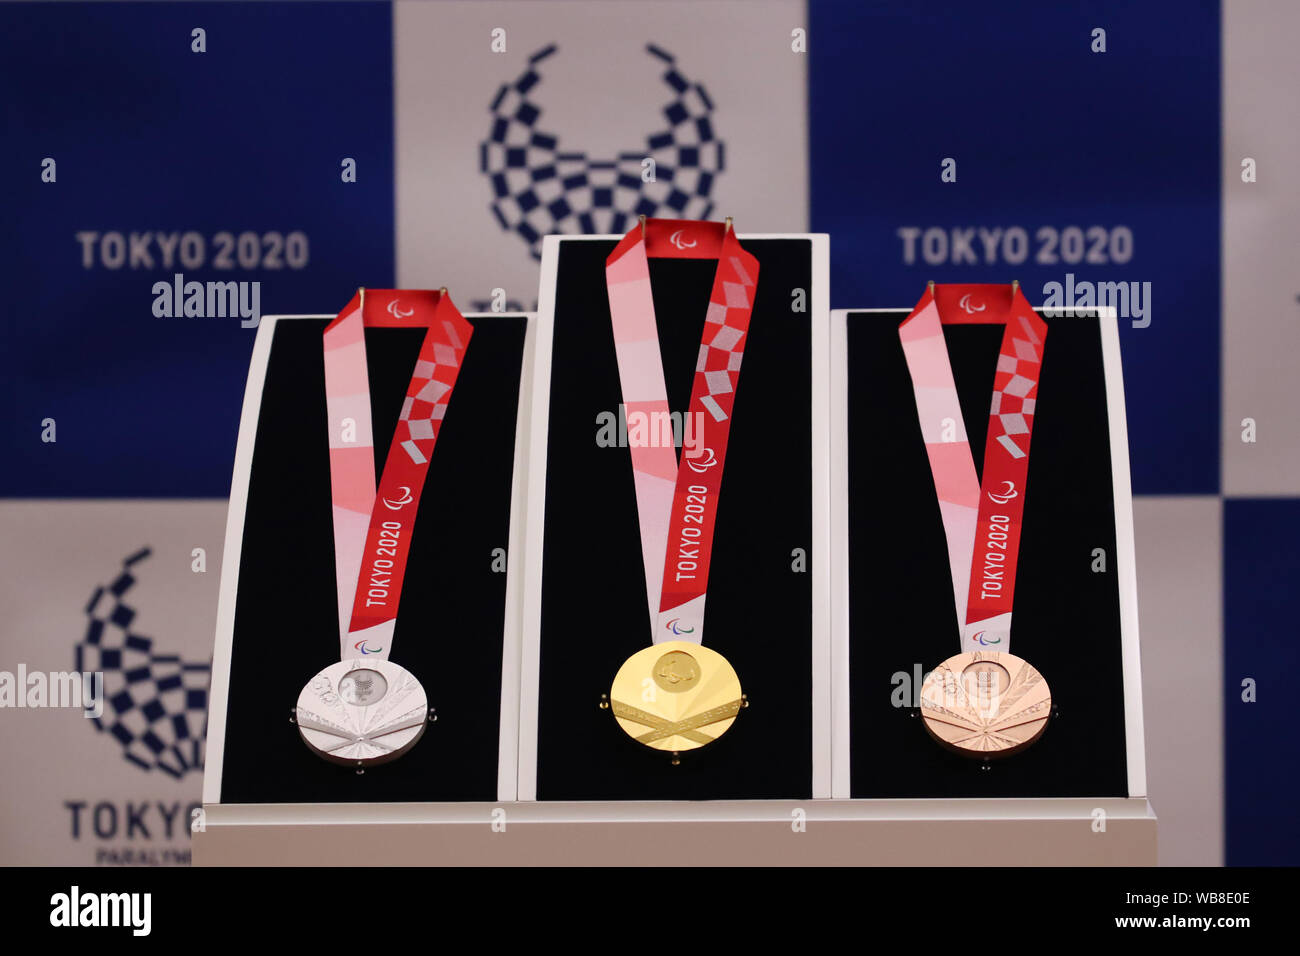 Tokyo 2020 Paralympic Medals - Photos & Medal Design